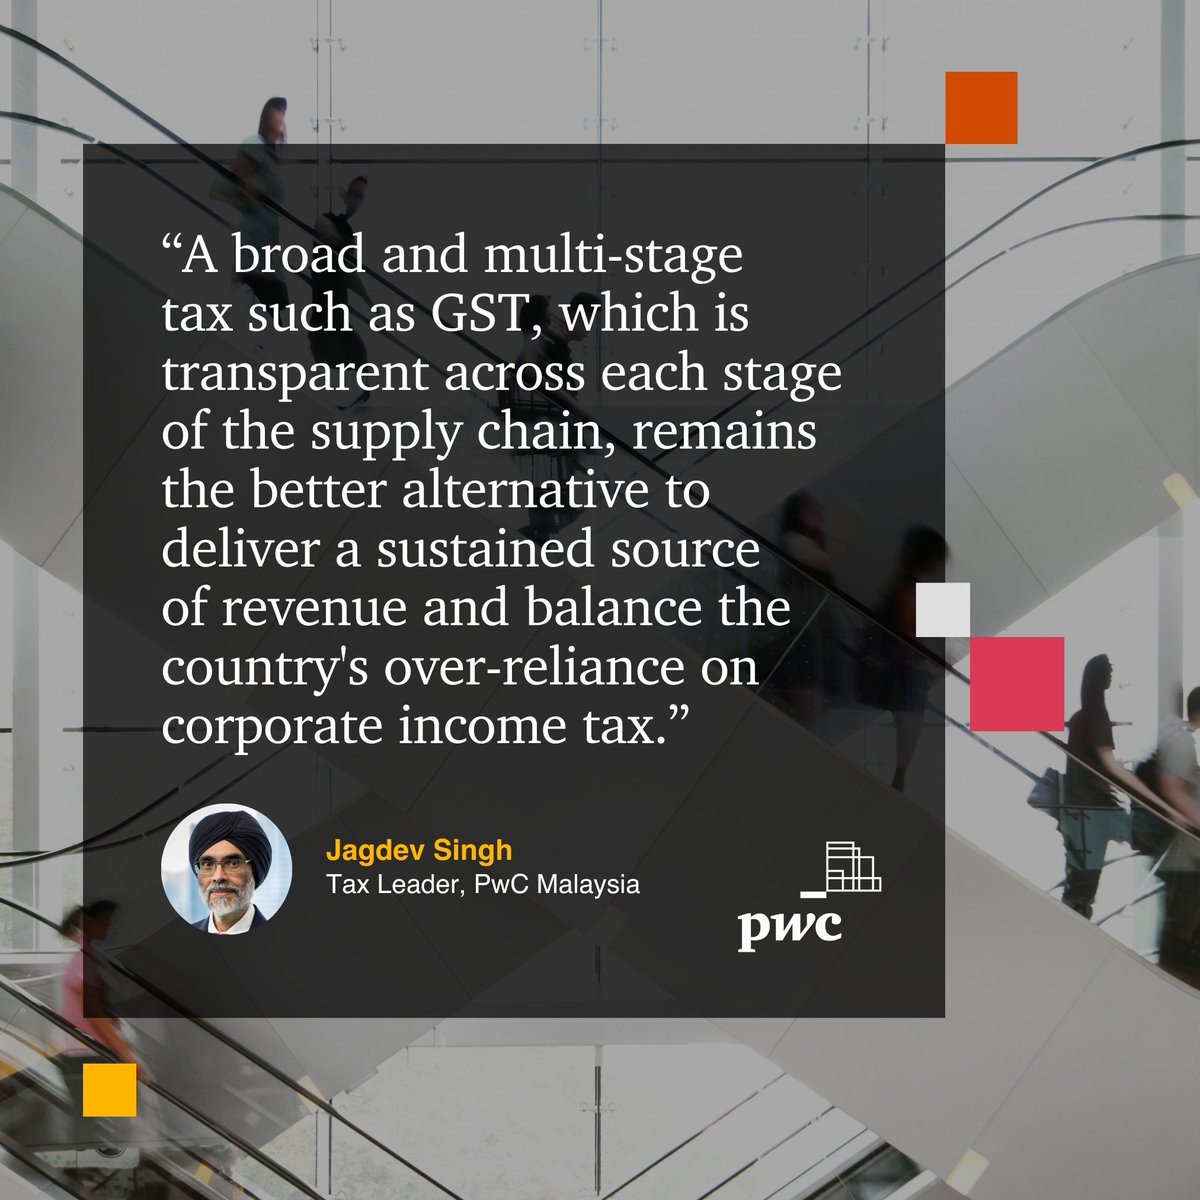 Addressing #Malaysia's fiscal dilemmas, Jagdev points to a broad and multi-stage tax as a more sustainable revenue source, emphasising the need to diversify beyond reliance on corporate #incometax. Full story on FMT: bit.ly/3PhfgrD